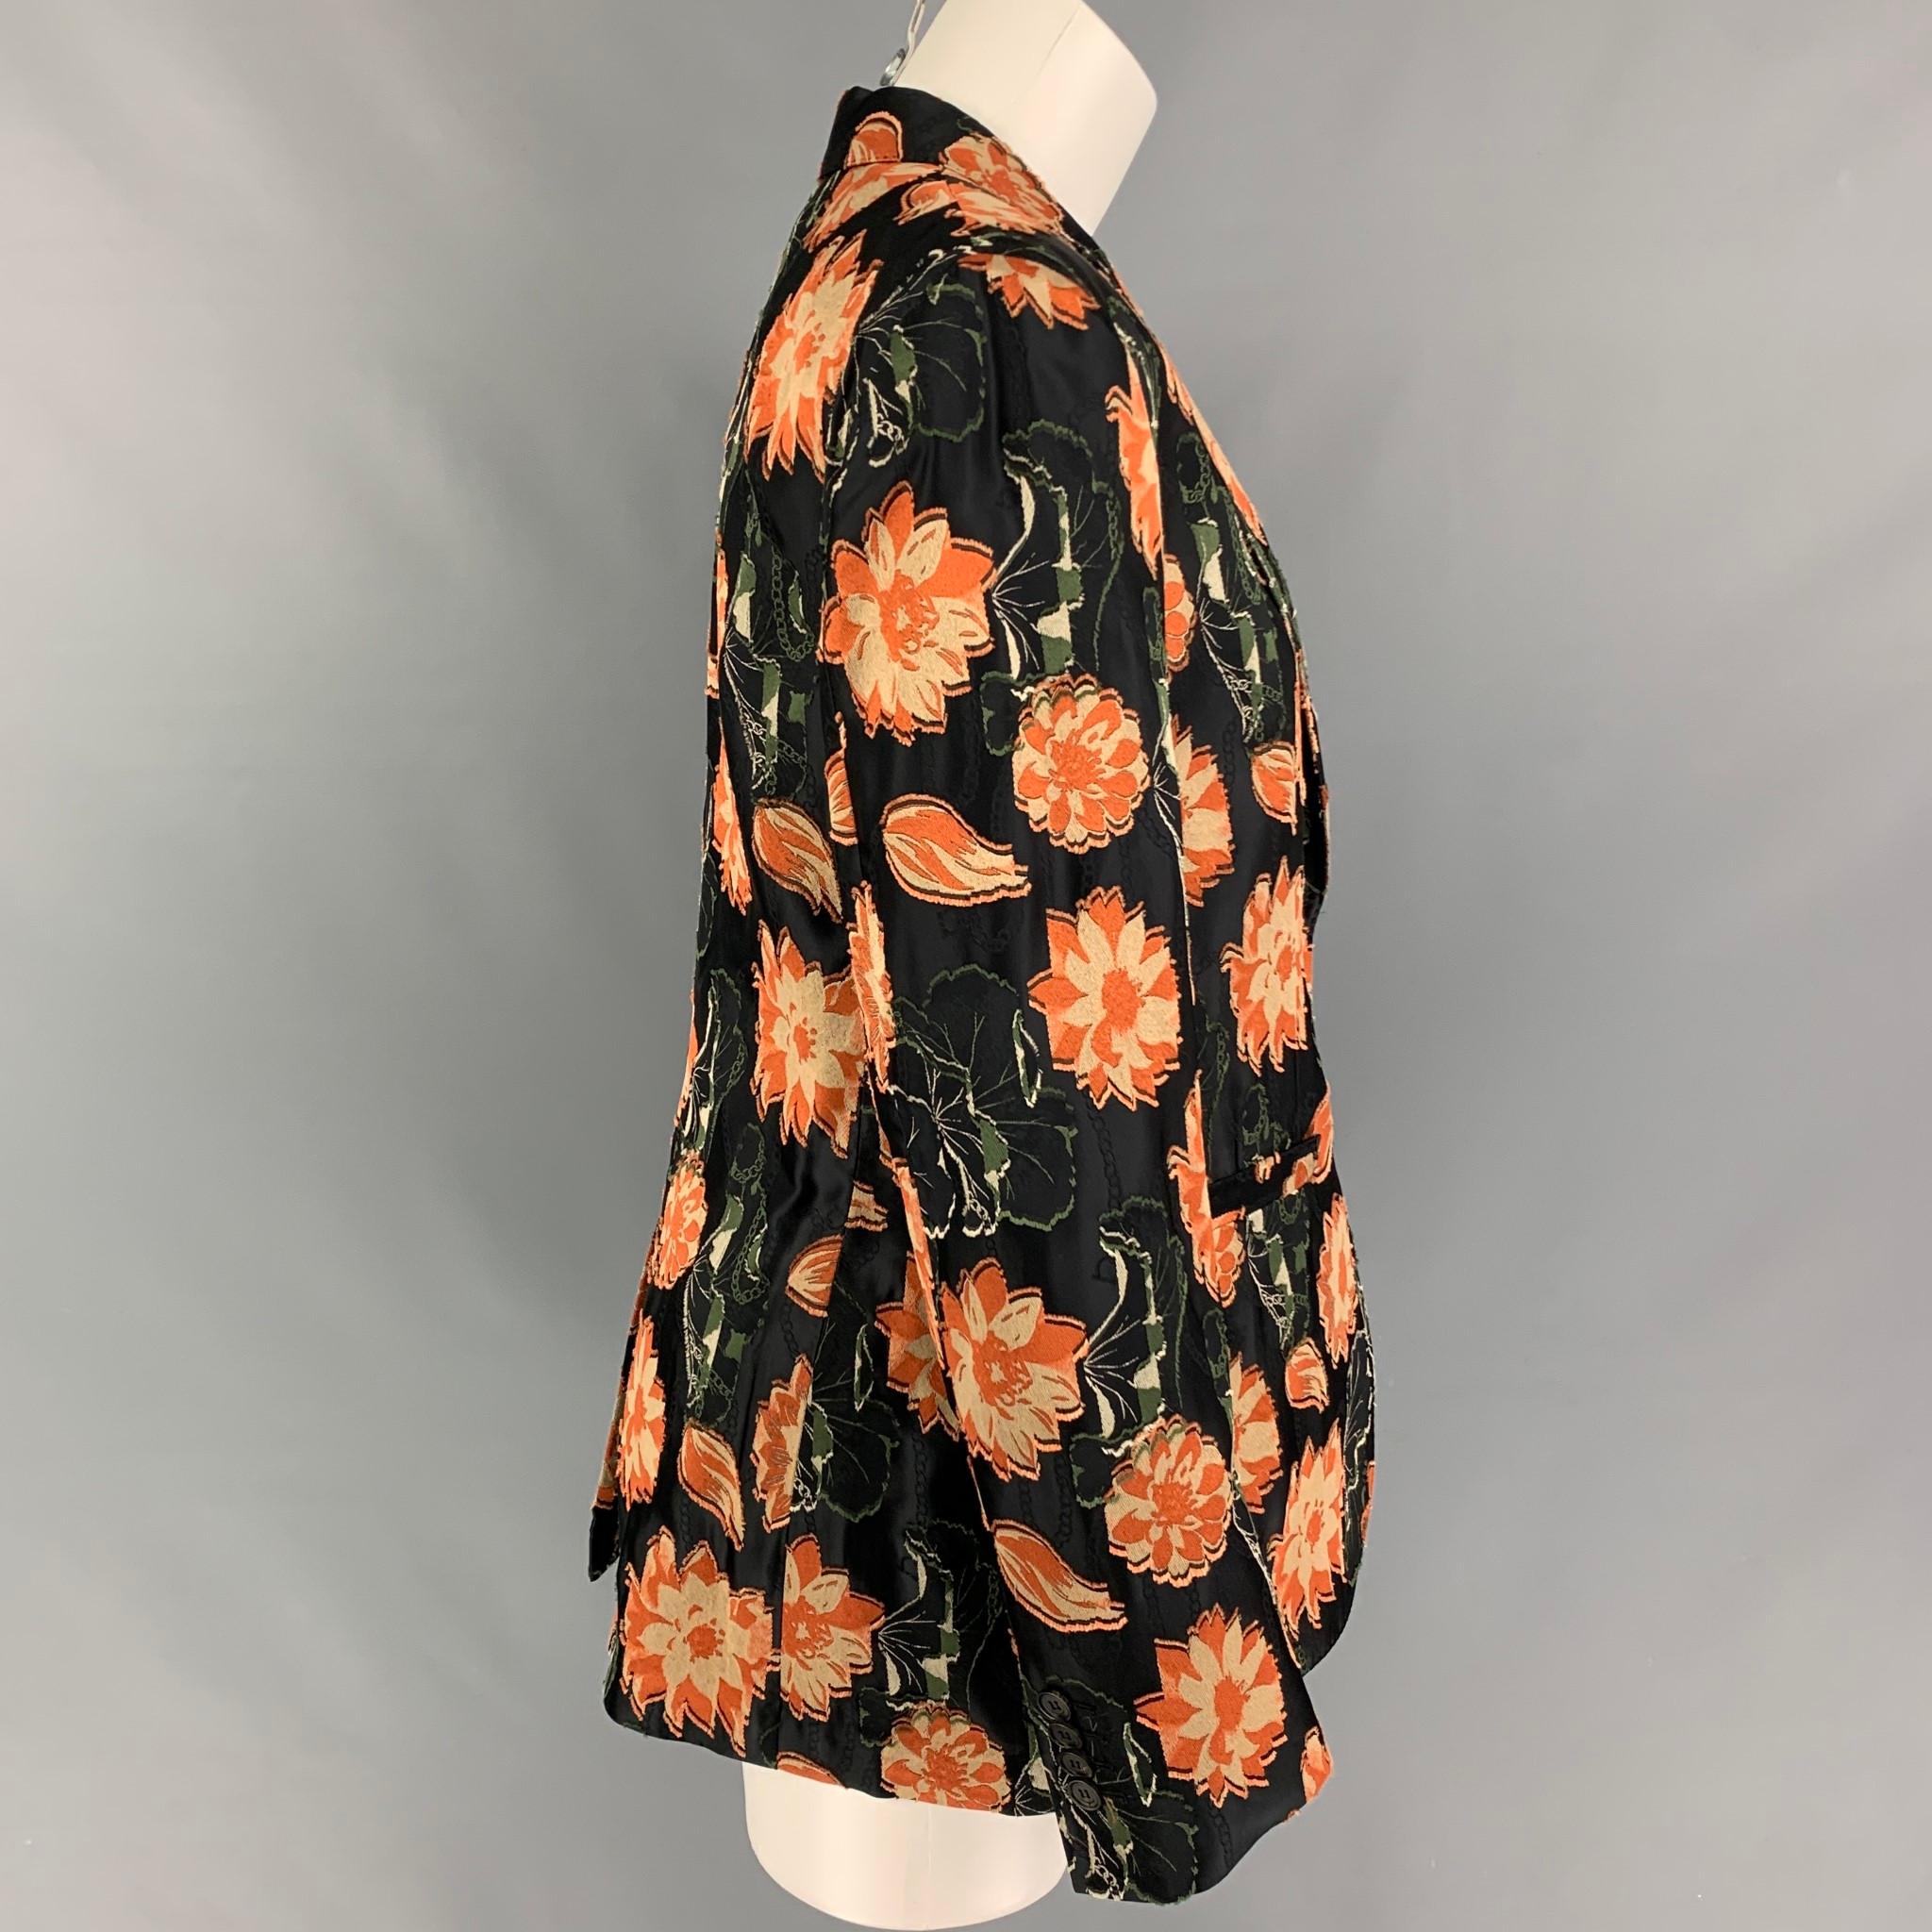 SALVATORE FERRAGAMO blazer comes in a black & orange jacquard floral polyester / viscose featuring a notch lapel, slit pockets, single back vent, and a double button closure. Made in Italy. 

Very Good Pre-Owned Condition.
Marked: